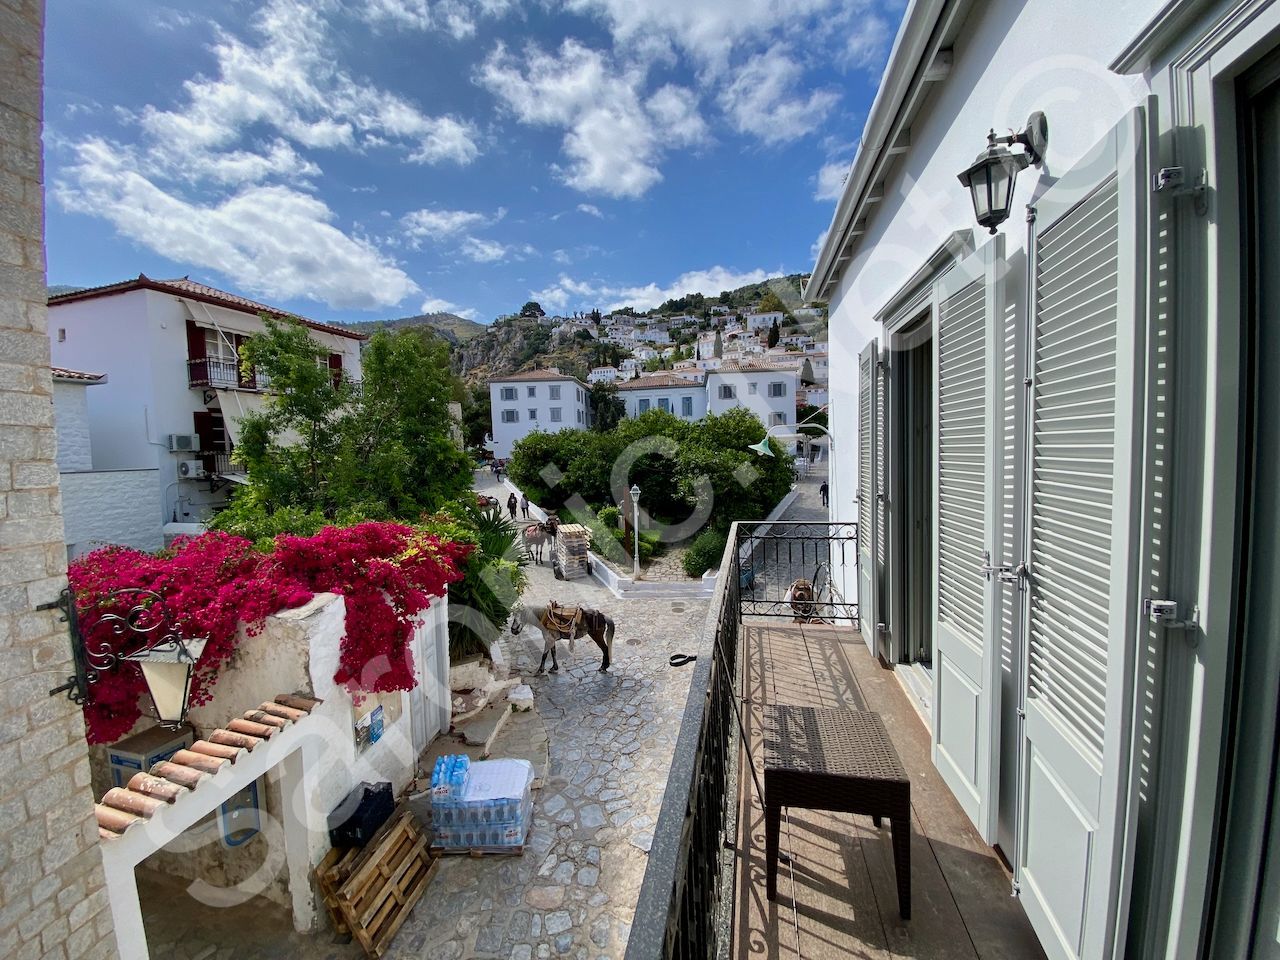 2 bedroom property for sale on Hydra Island Greece in perfect ready to move into condition.